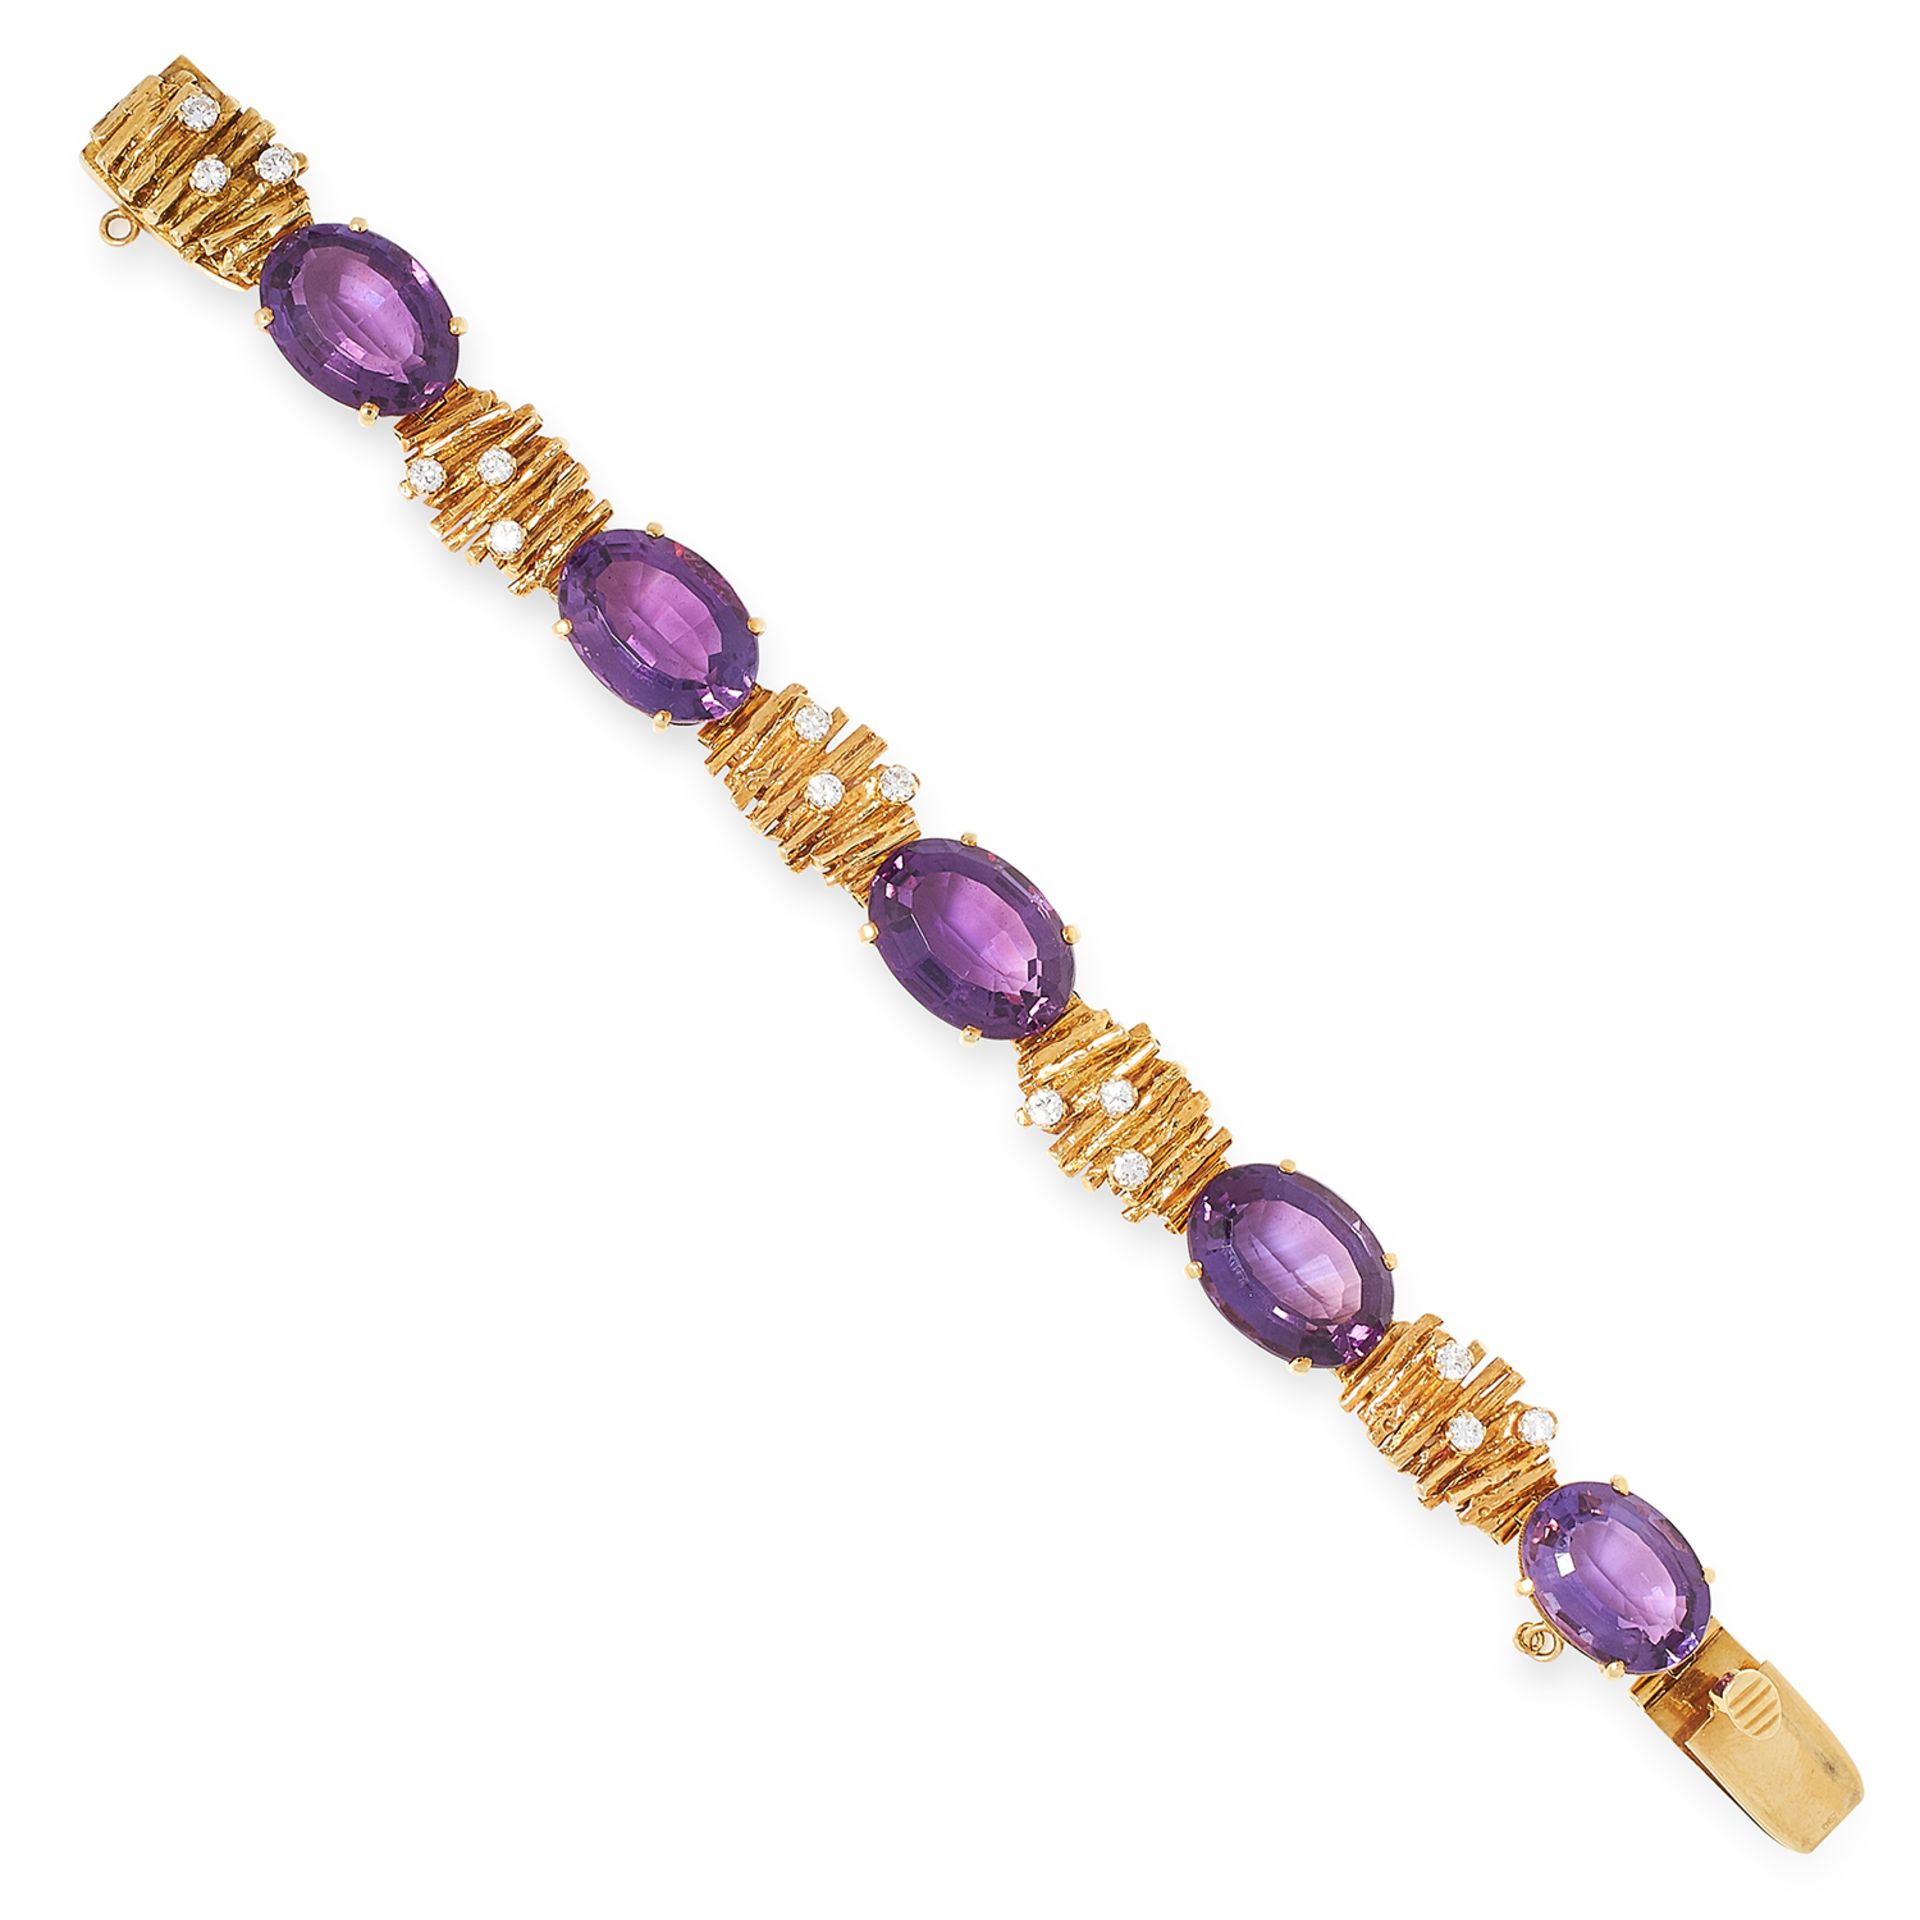 AN AMETHYST AND DIAMOND BRACELET, SEARLE & CO set with oval cut amethysts and round cut diamonds